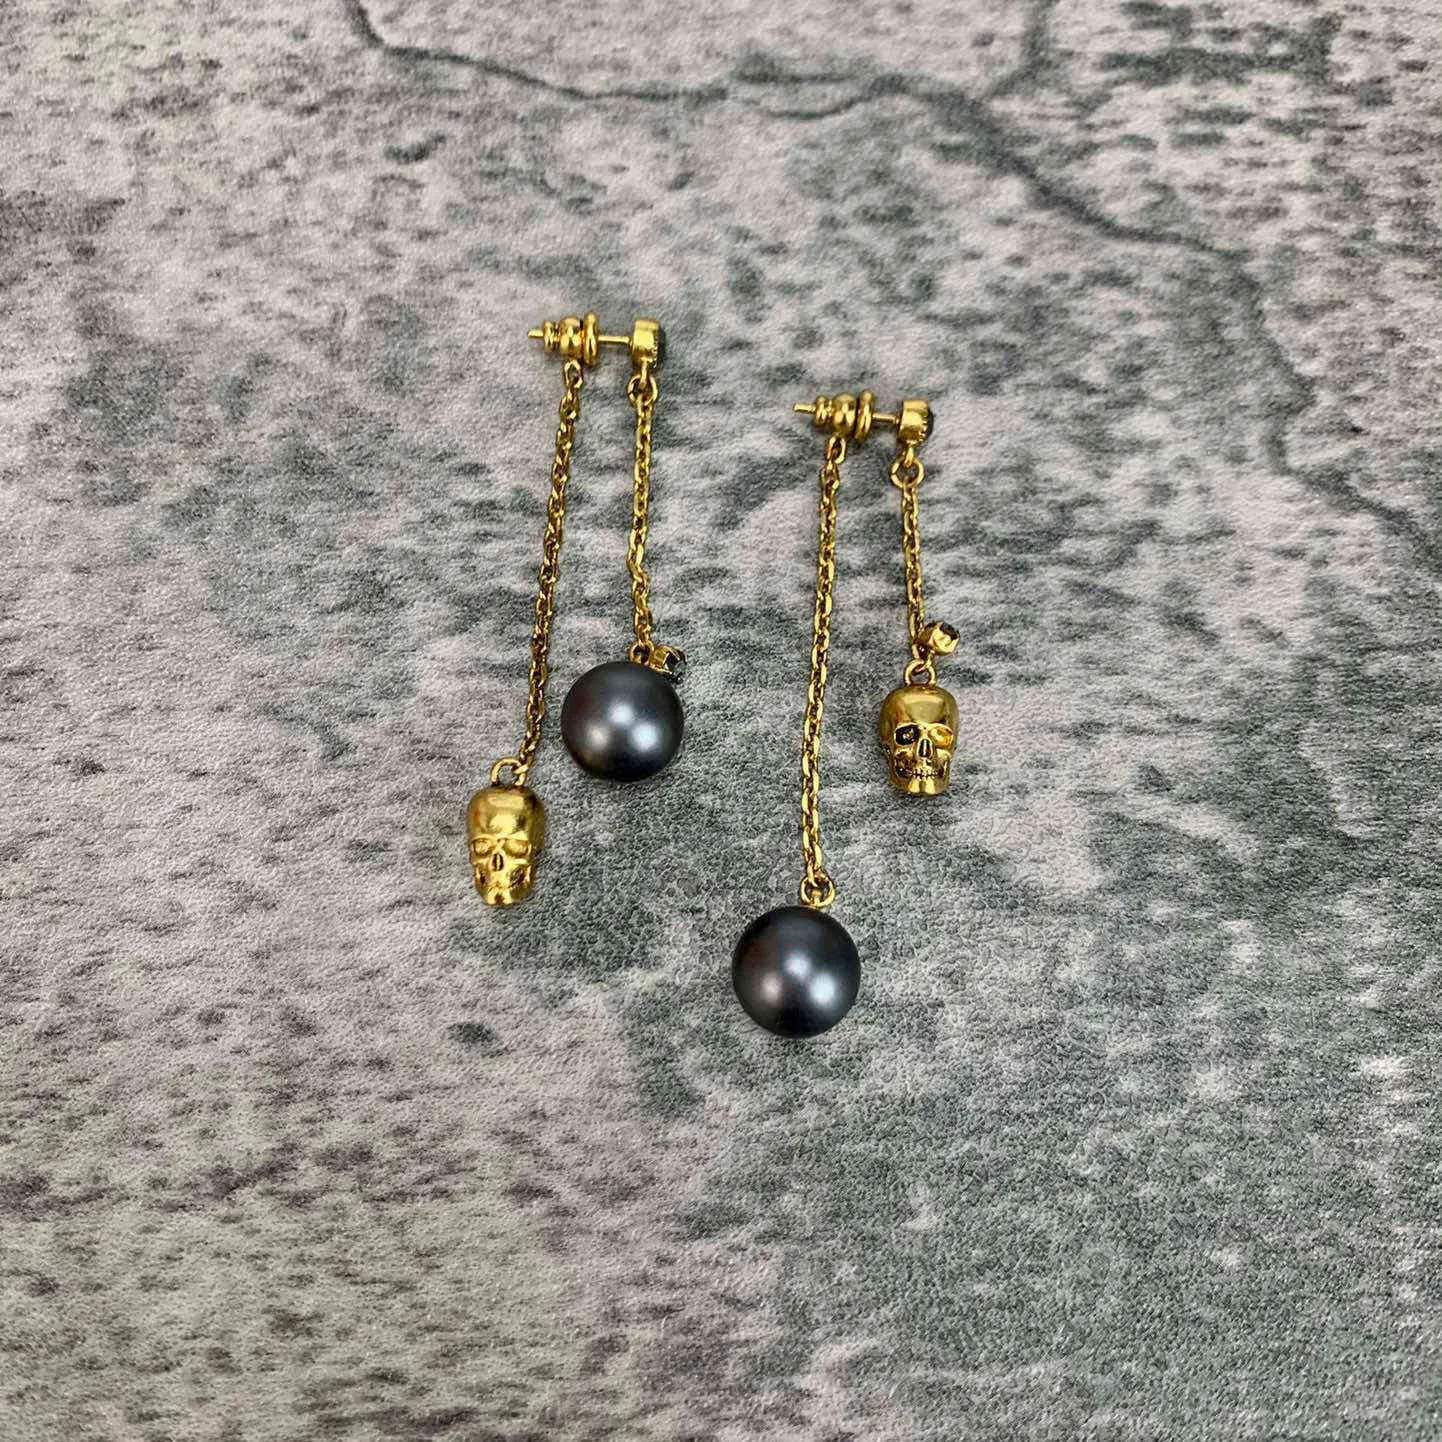 Brand Yellow Gold Color Fashion Jewelry Woman Black Pearls Earrings Skull Head Party High Quality Chain Pearls Stud Earrings4435105